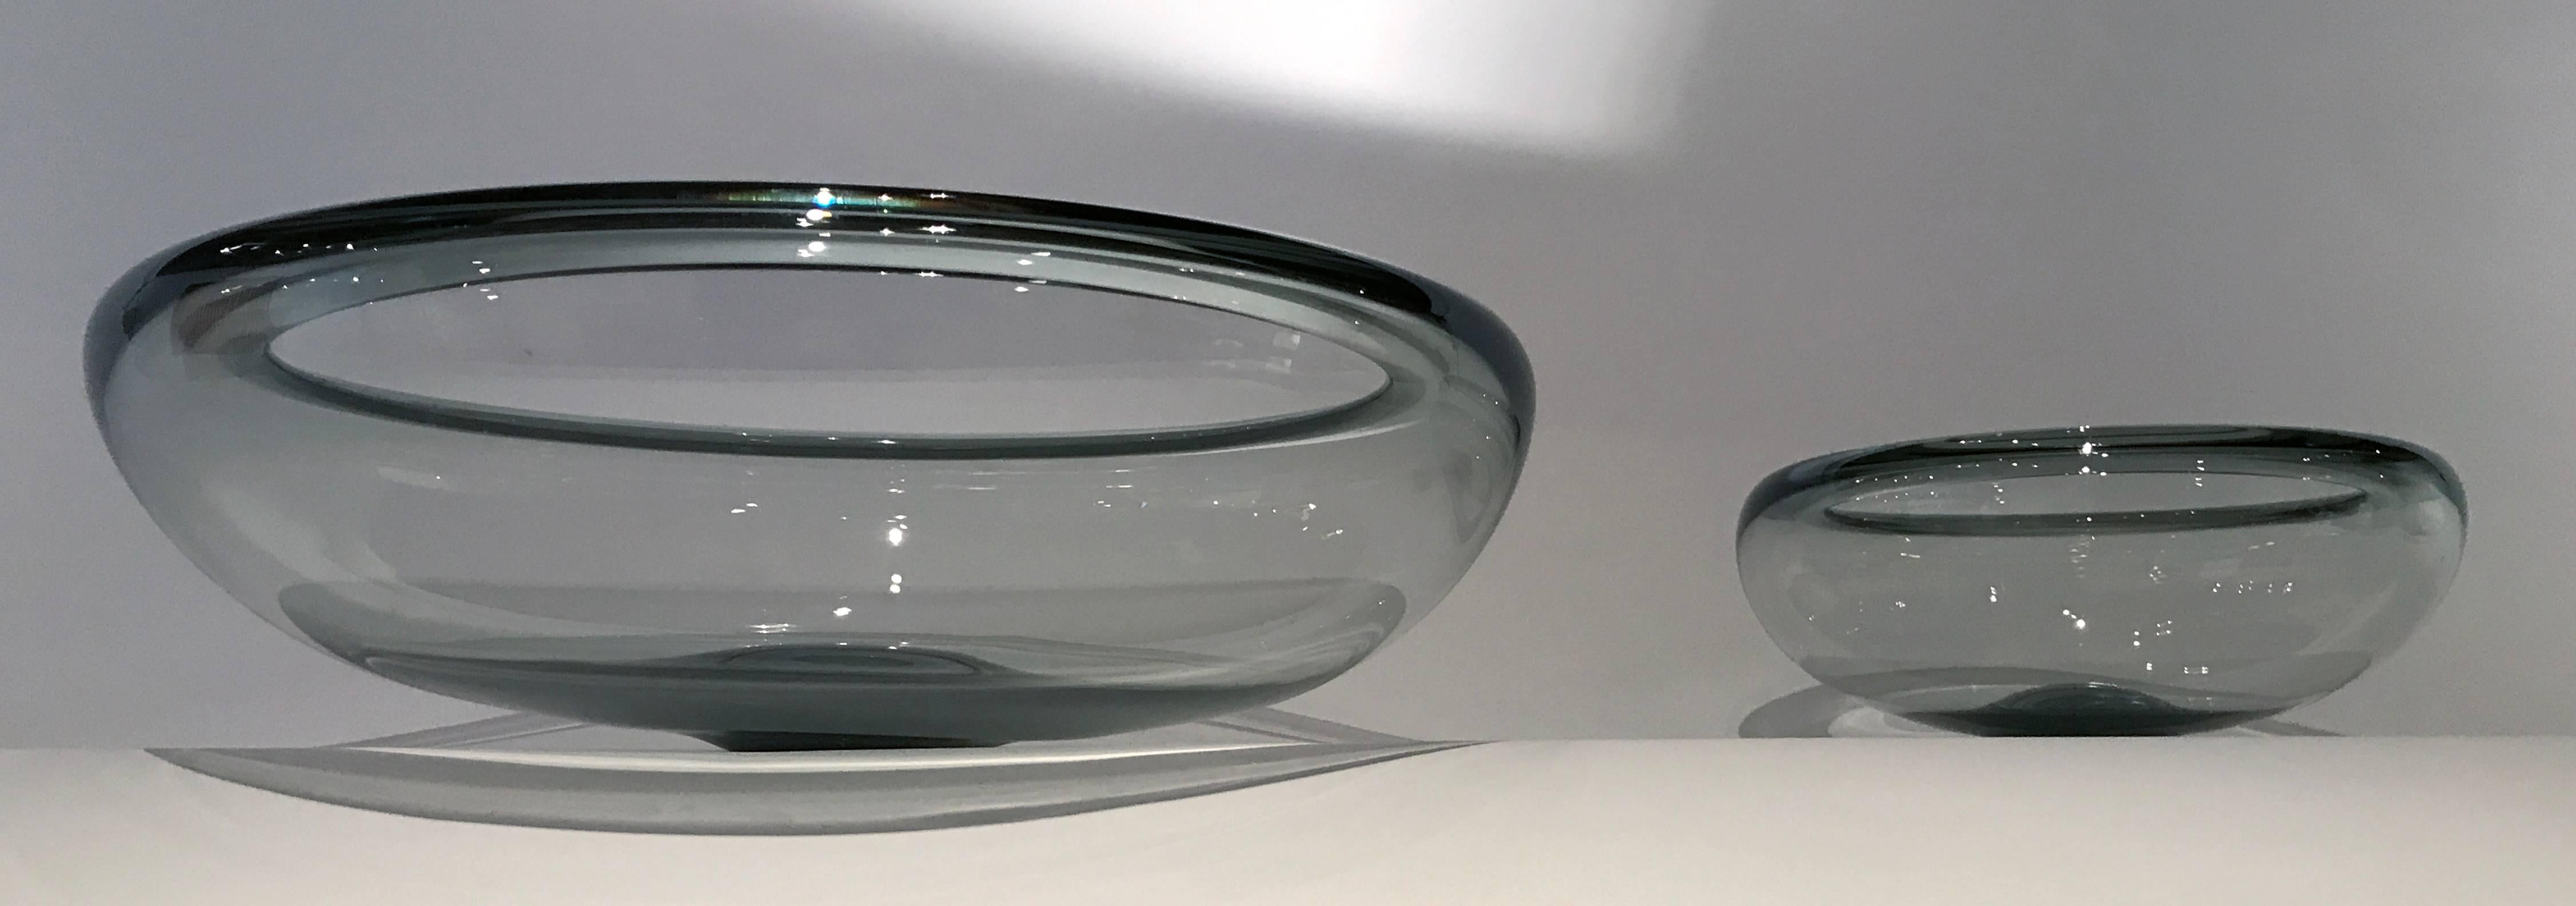 Beautiful large and medium-size glass bowls by Per Lutken for Holmegaard, Denmark, 1960s.
The large bowl measures 17